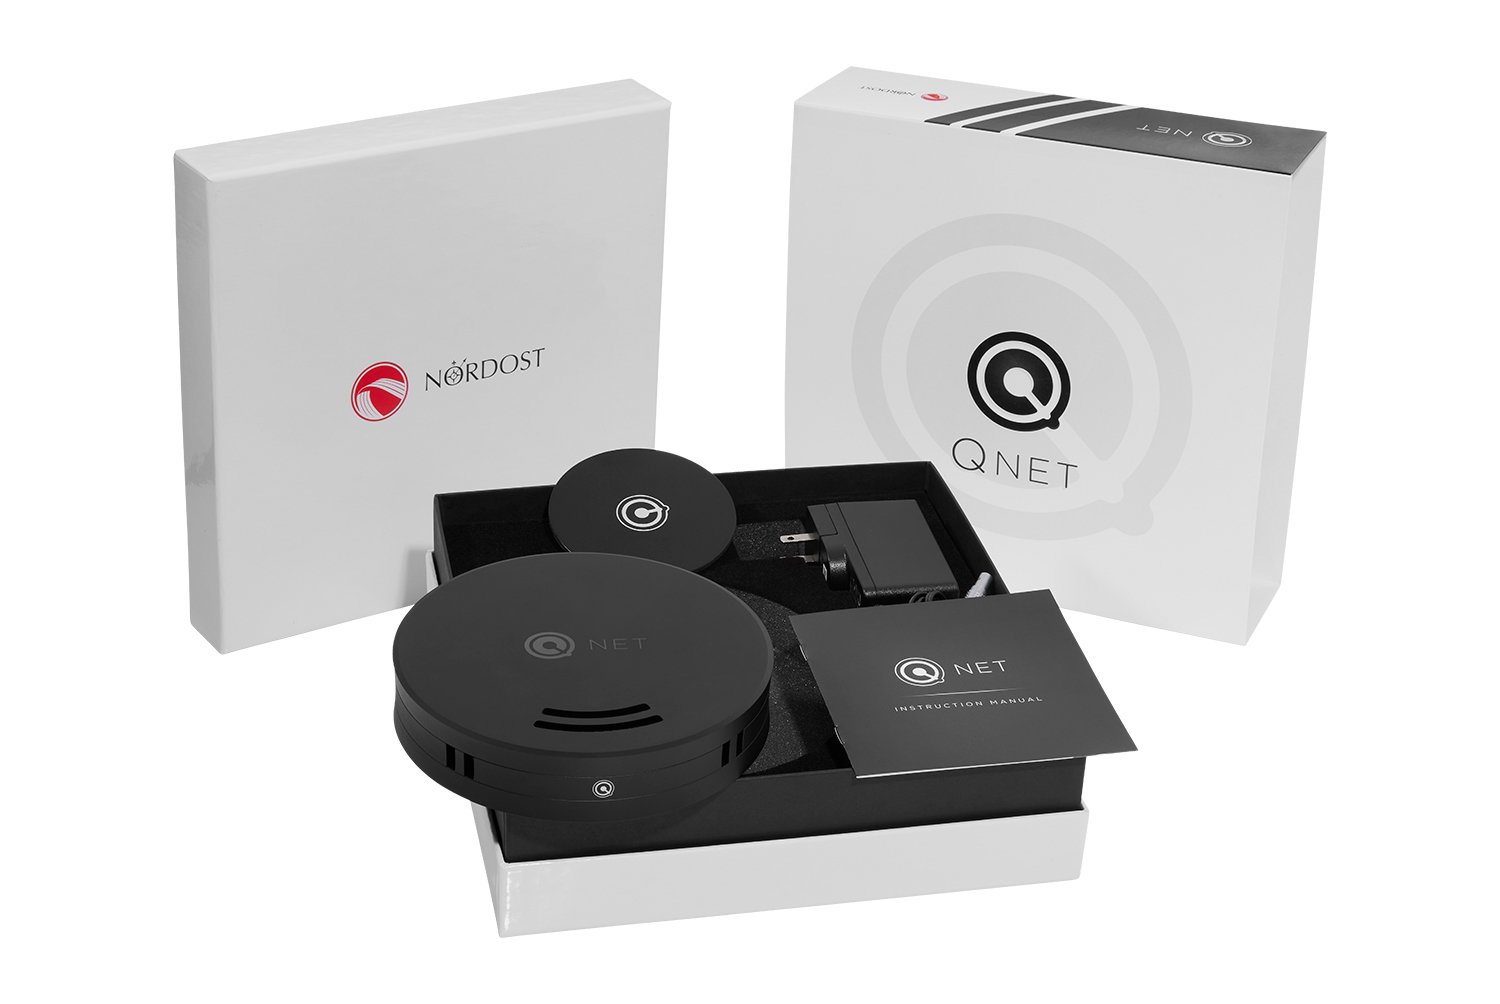 QNET-packaging-contents.jpeg